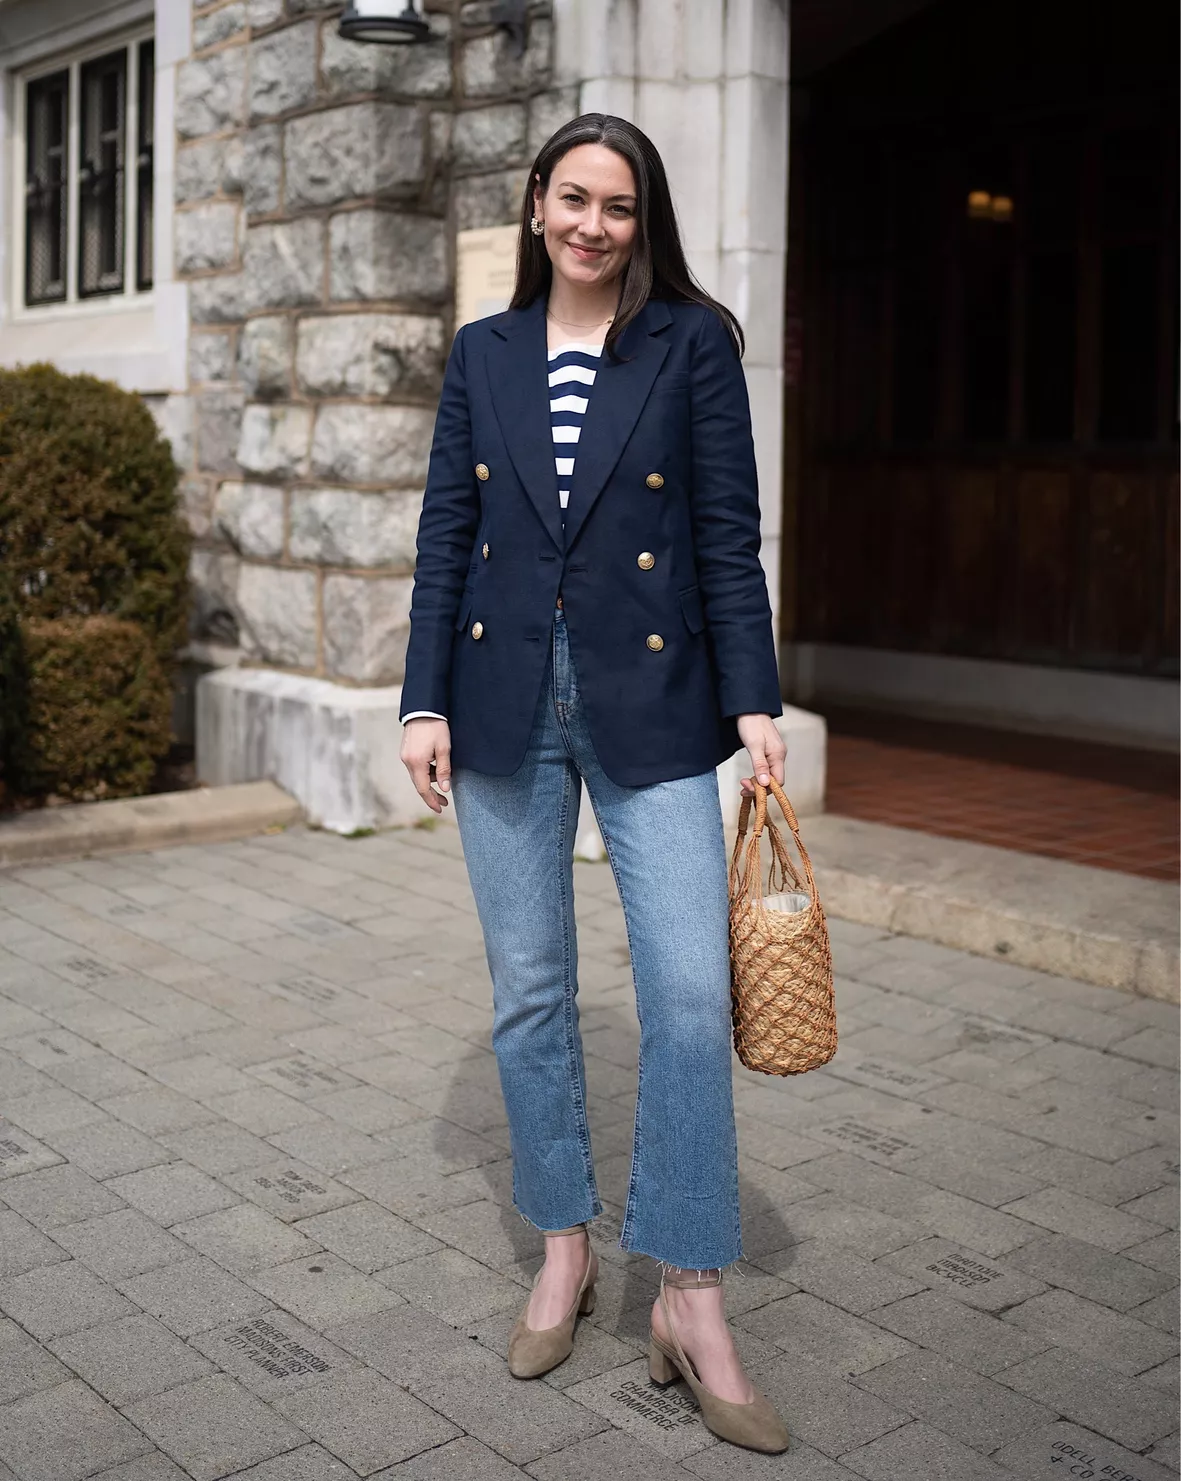 Outfit from last week sporting my new bag. @JCrew blazer and shoes